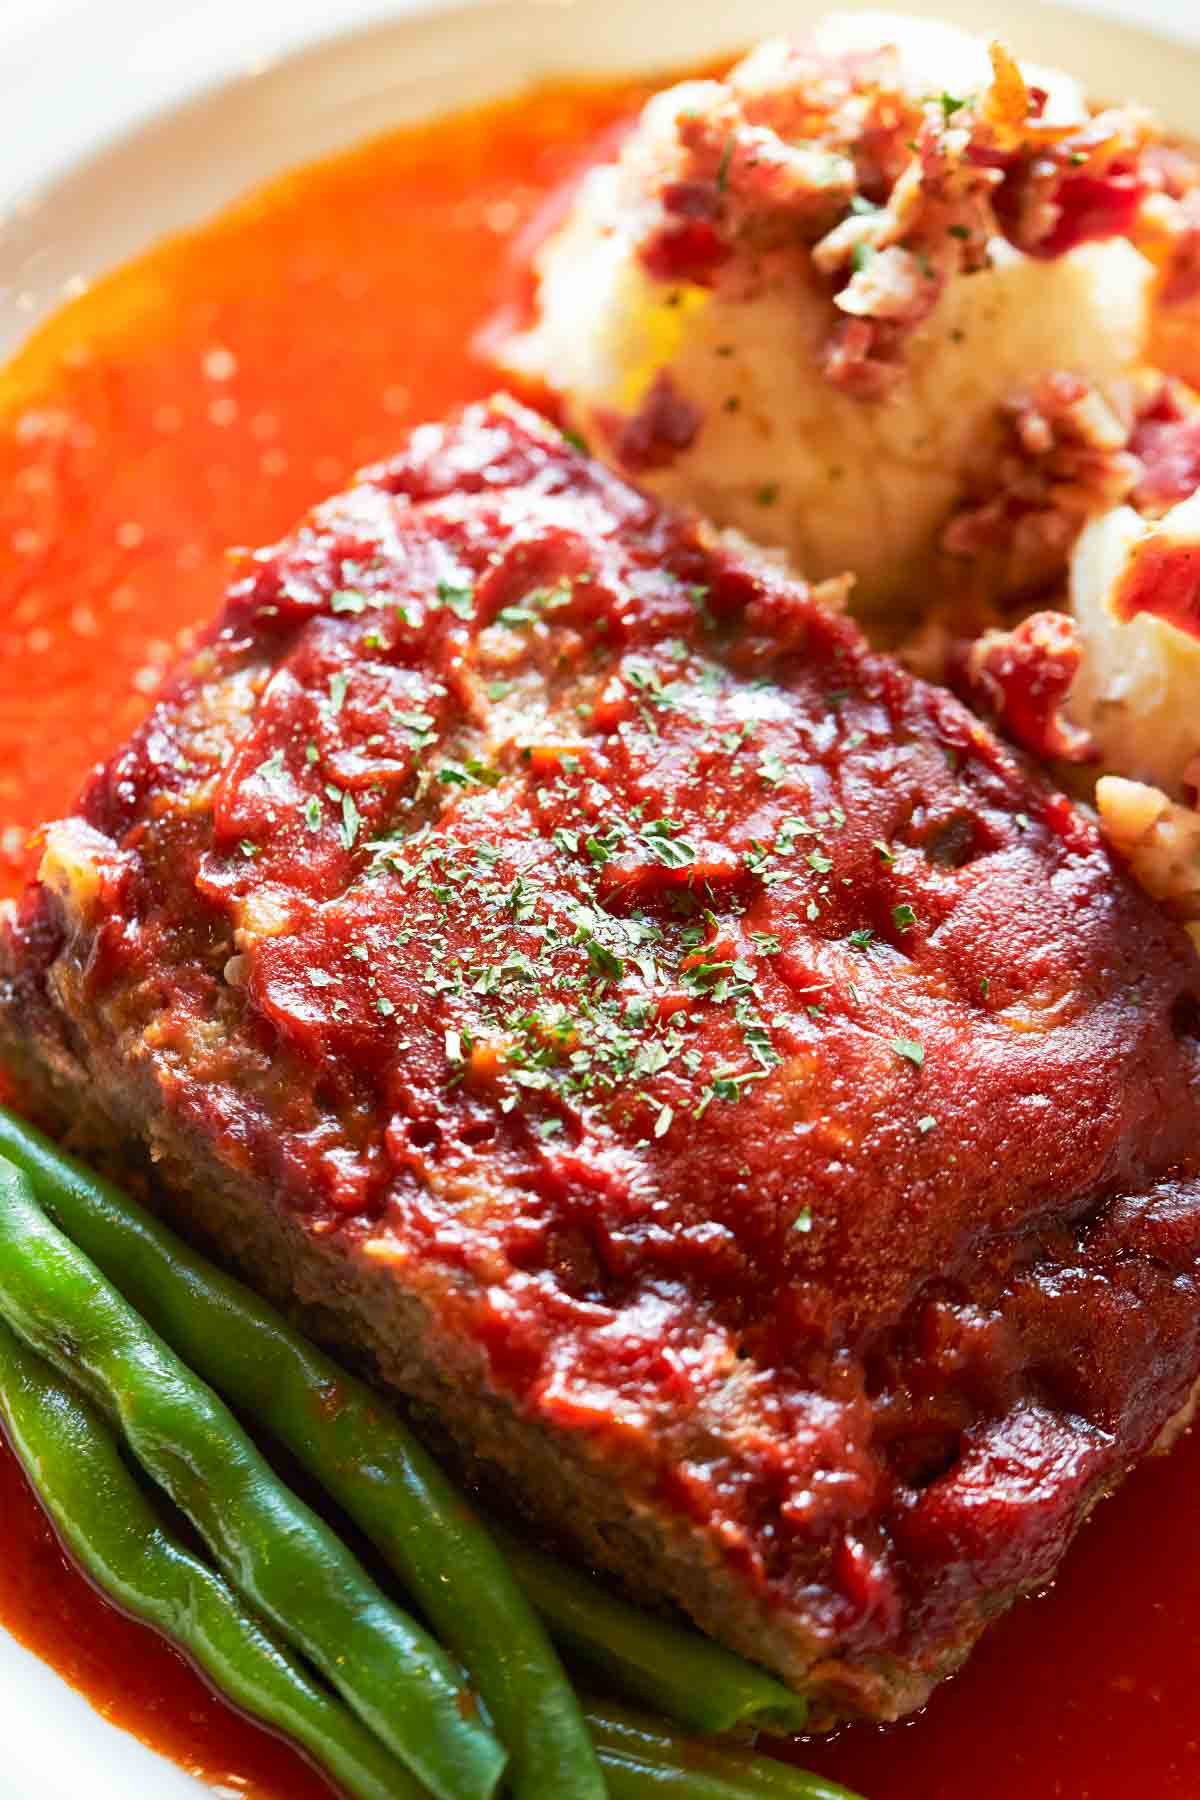 Lipton Onion Soup Meatloaf comes out so tender, juicy, and flavorful every single time! This copycat recipe is made with just 6 simple ingredients and minimal prep time. A packet of Lipton Onion Soup Mix is the key to a well-seasoned loaf that’s full of flavor. 